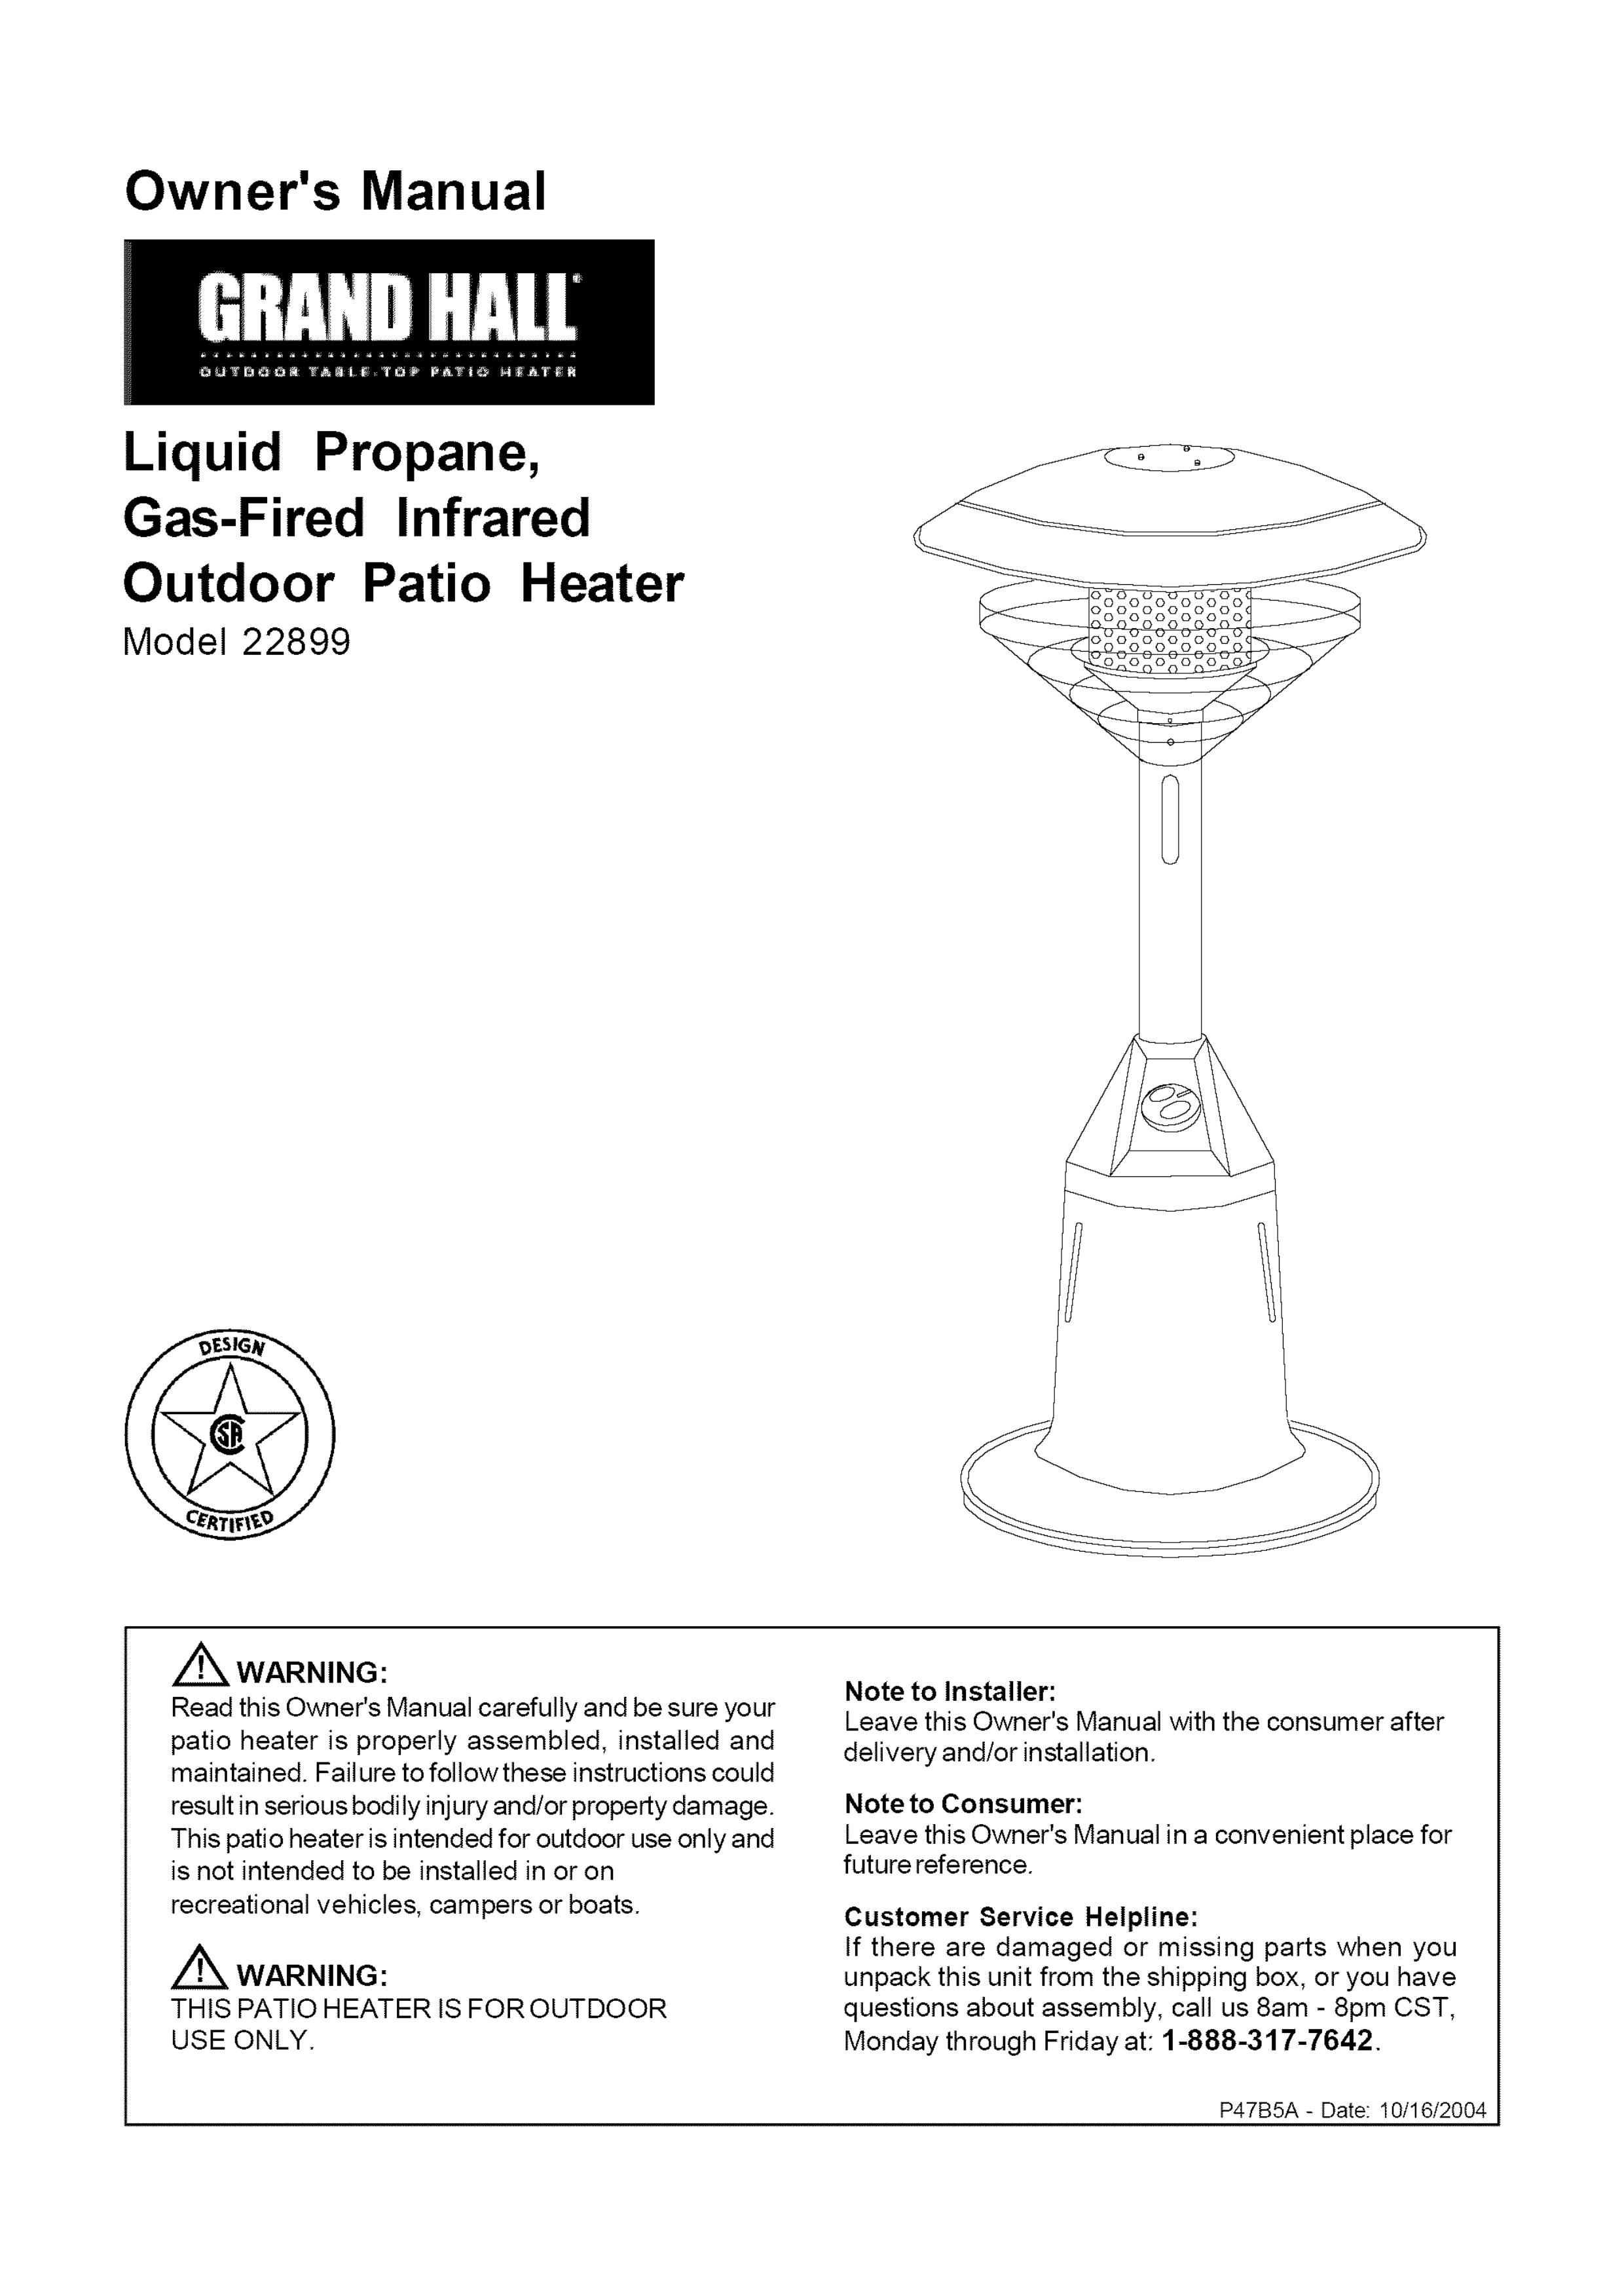 Grand Hall 22899 Patio Heater User Manual (Page 1)